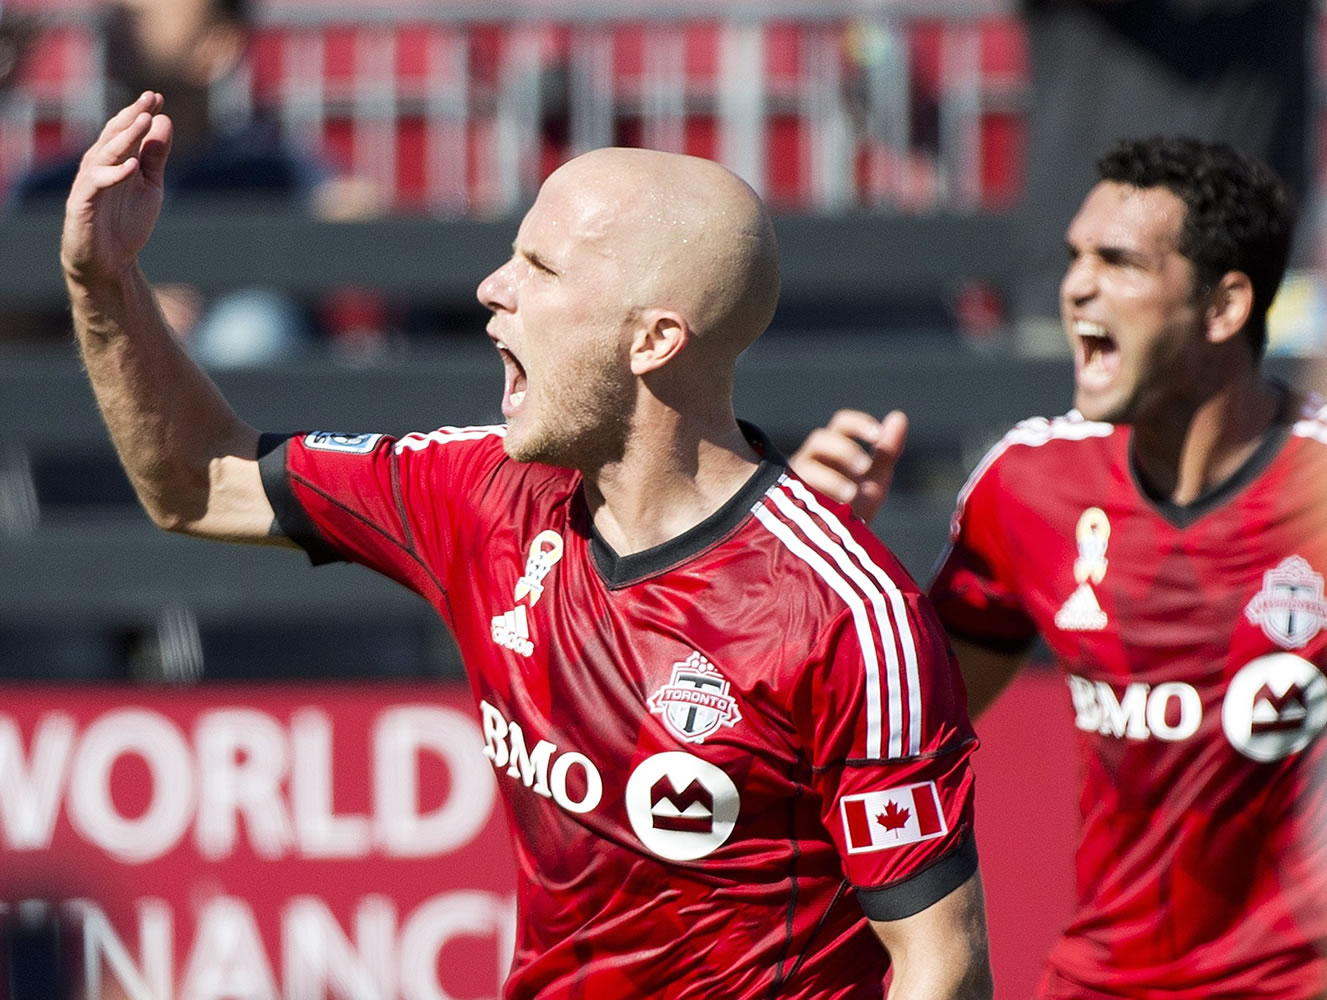 Toronto FC midfielder Michael Bradley, left, reacts after scoring the game winning goal during the second half  against the Portland Timbers in Toronto, Saturday, Sept. 27, 2014. Toronto won 3-2.